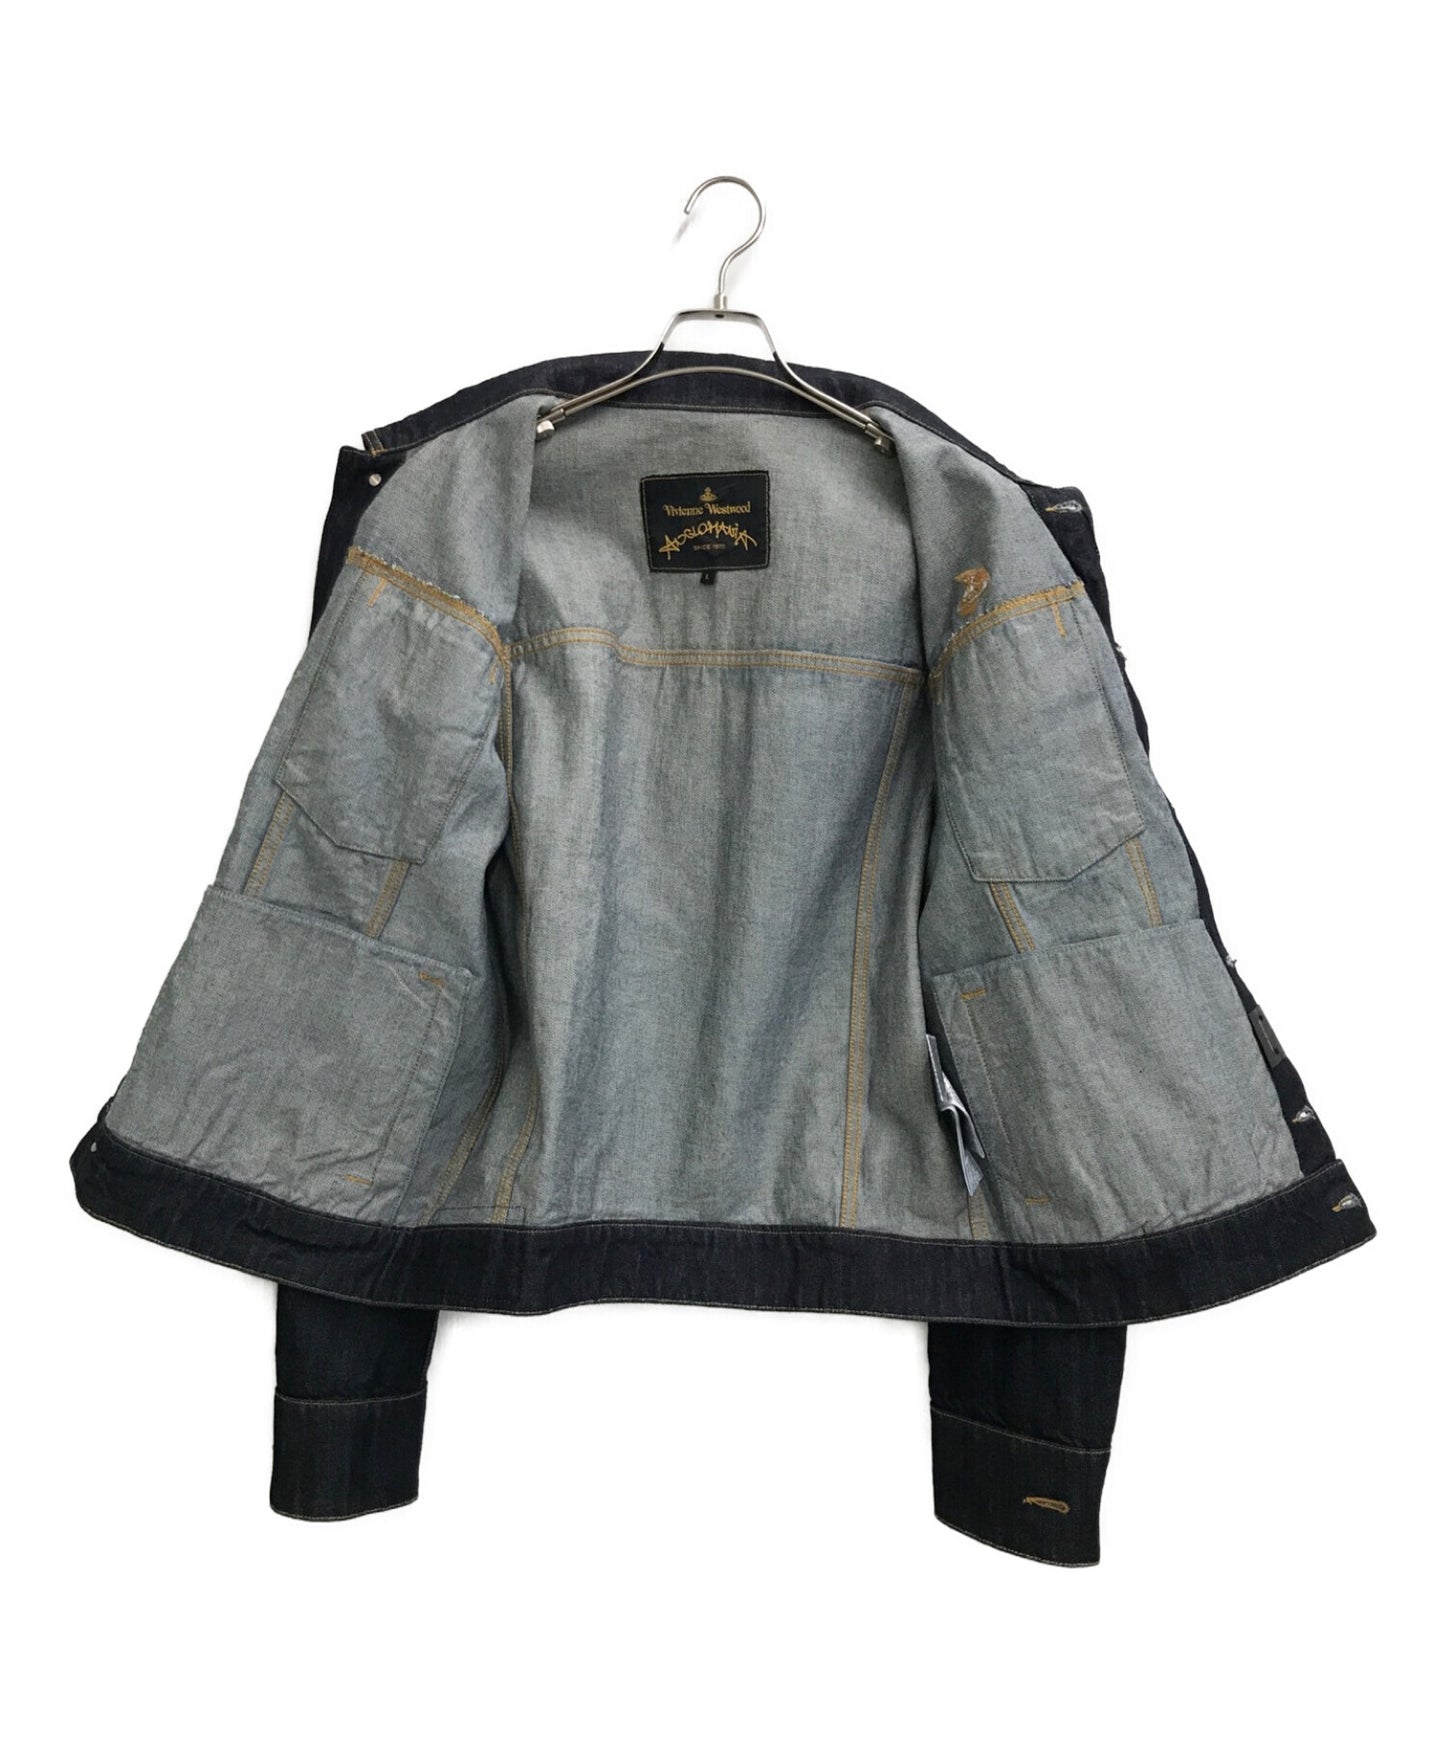 [Pre-owned] Vivienne Westwood ANGLOMANIA New D.Ace denim jacket 28010002-10566